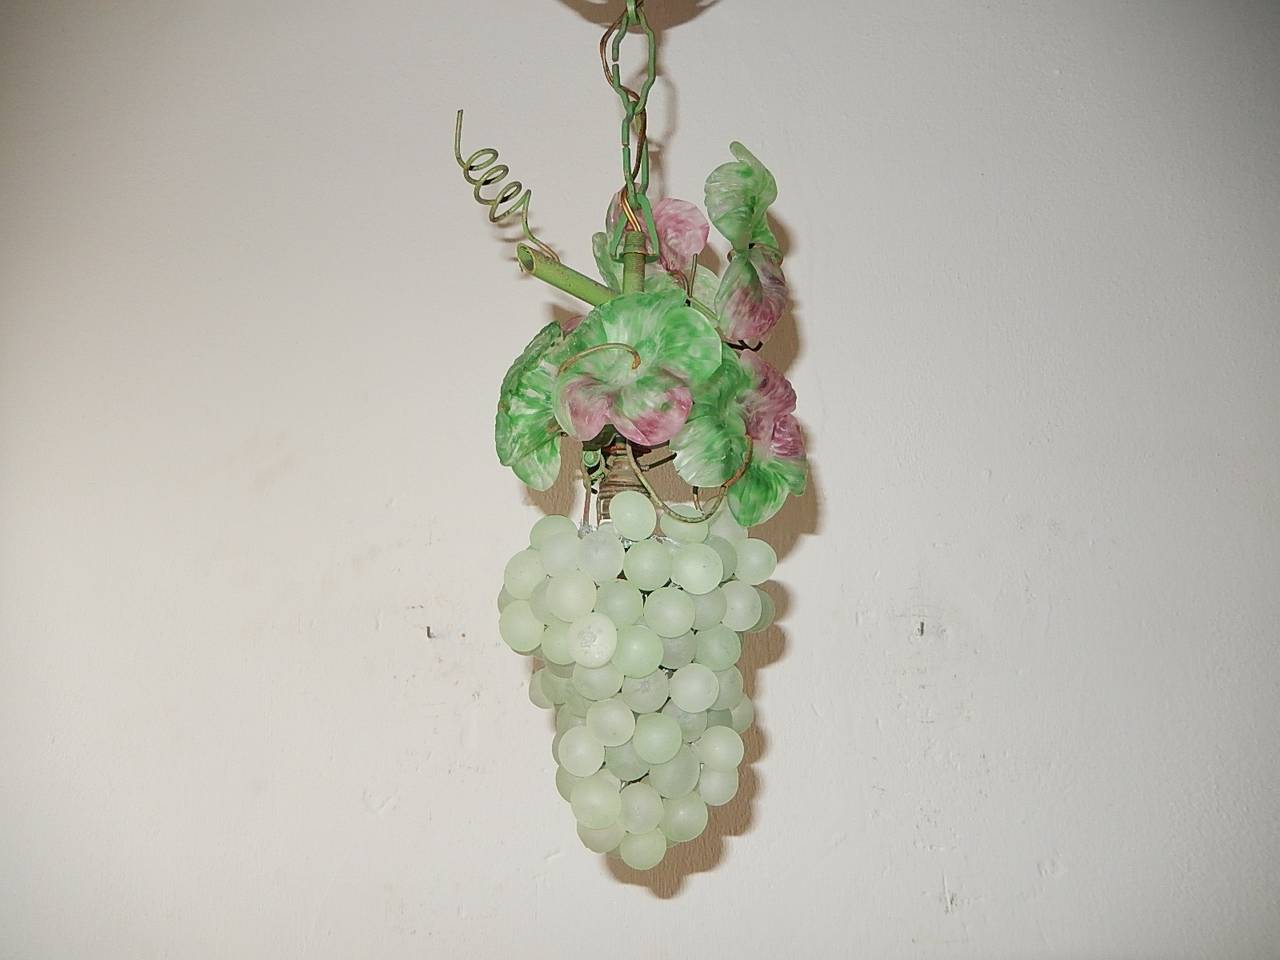 Housing 1 light.  Light green Murano glass in shapes of grapes and leaves.  Leaves are two toned.  Rare find.  Adding another 5 inches of original chain and canopy.  Free priority shipping from Italy.  Re-wired and ready to hang.